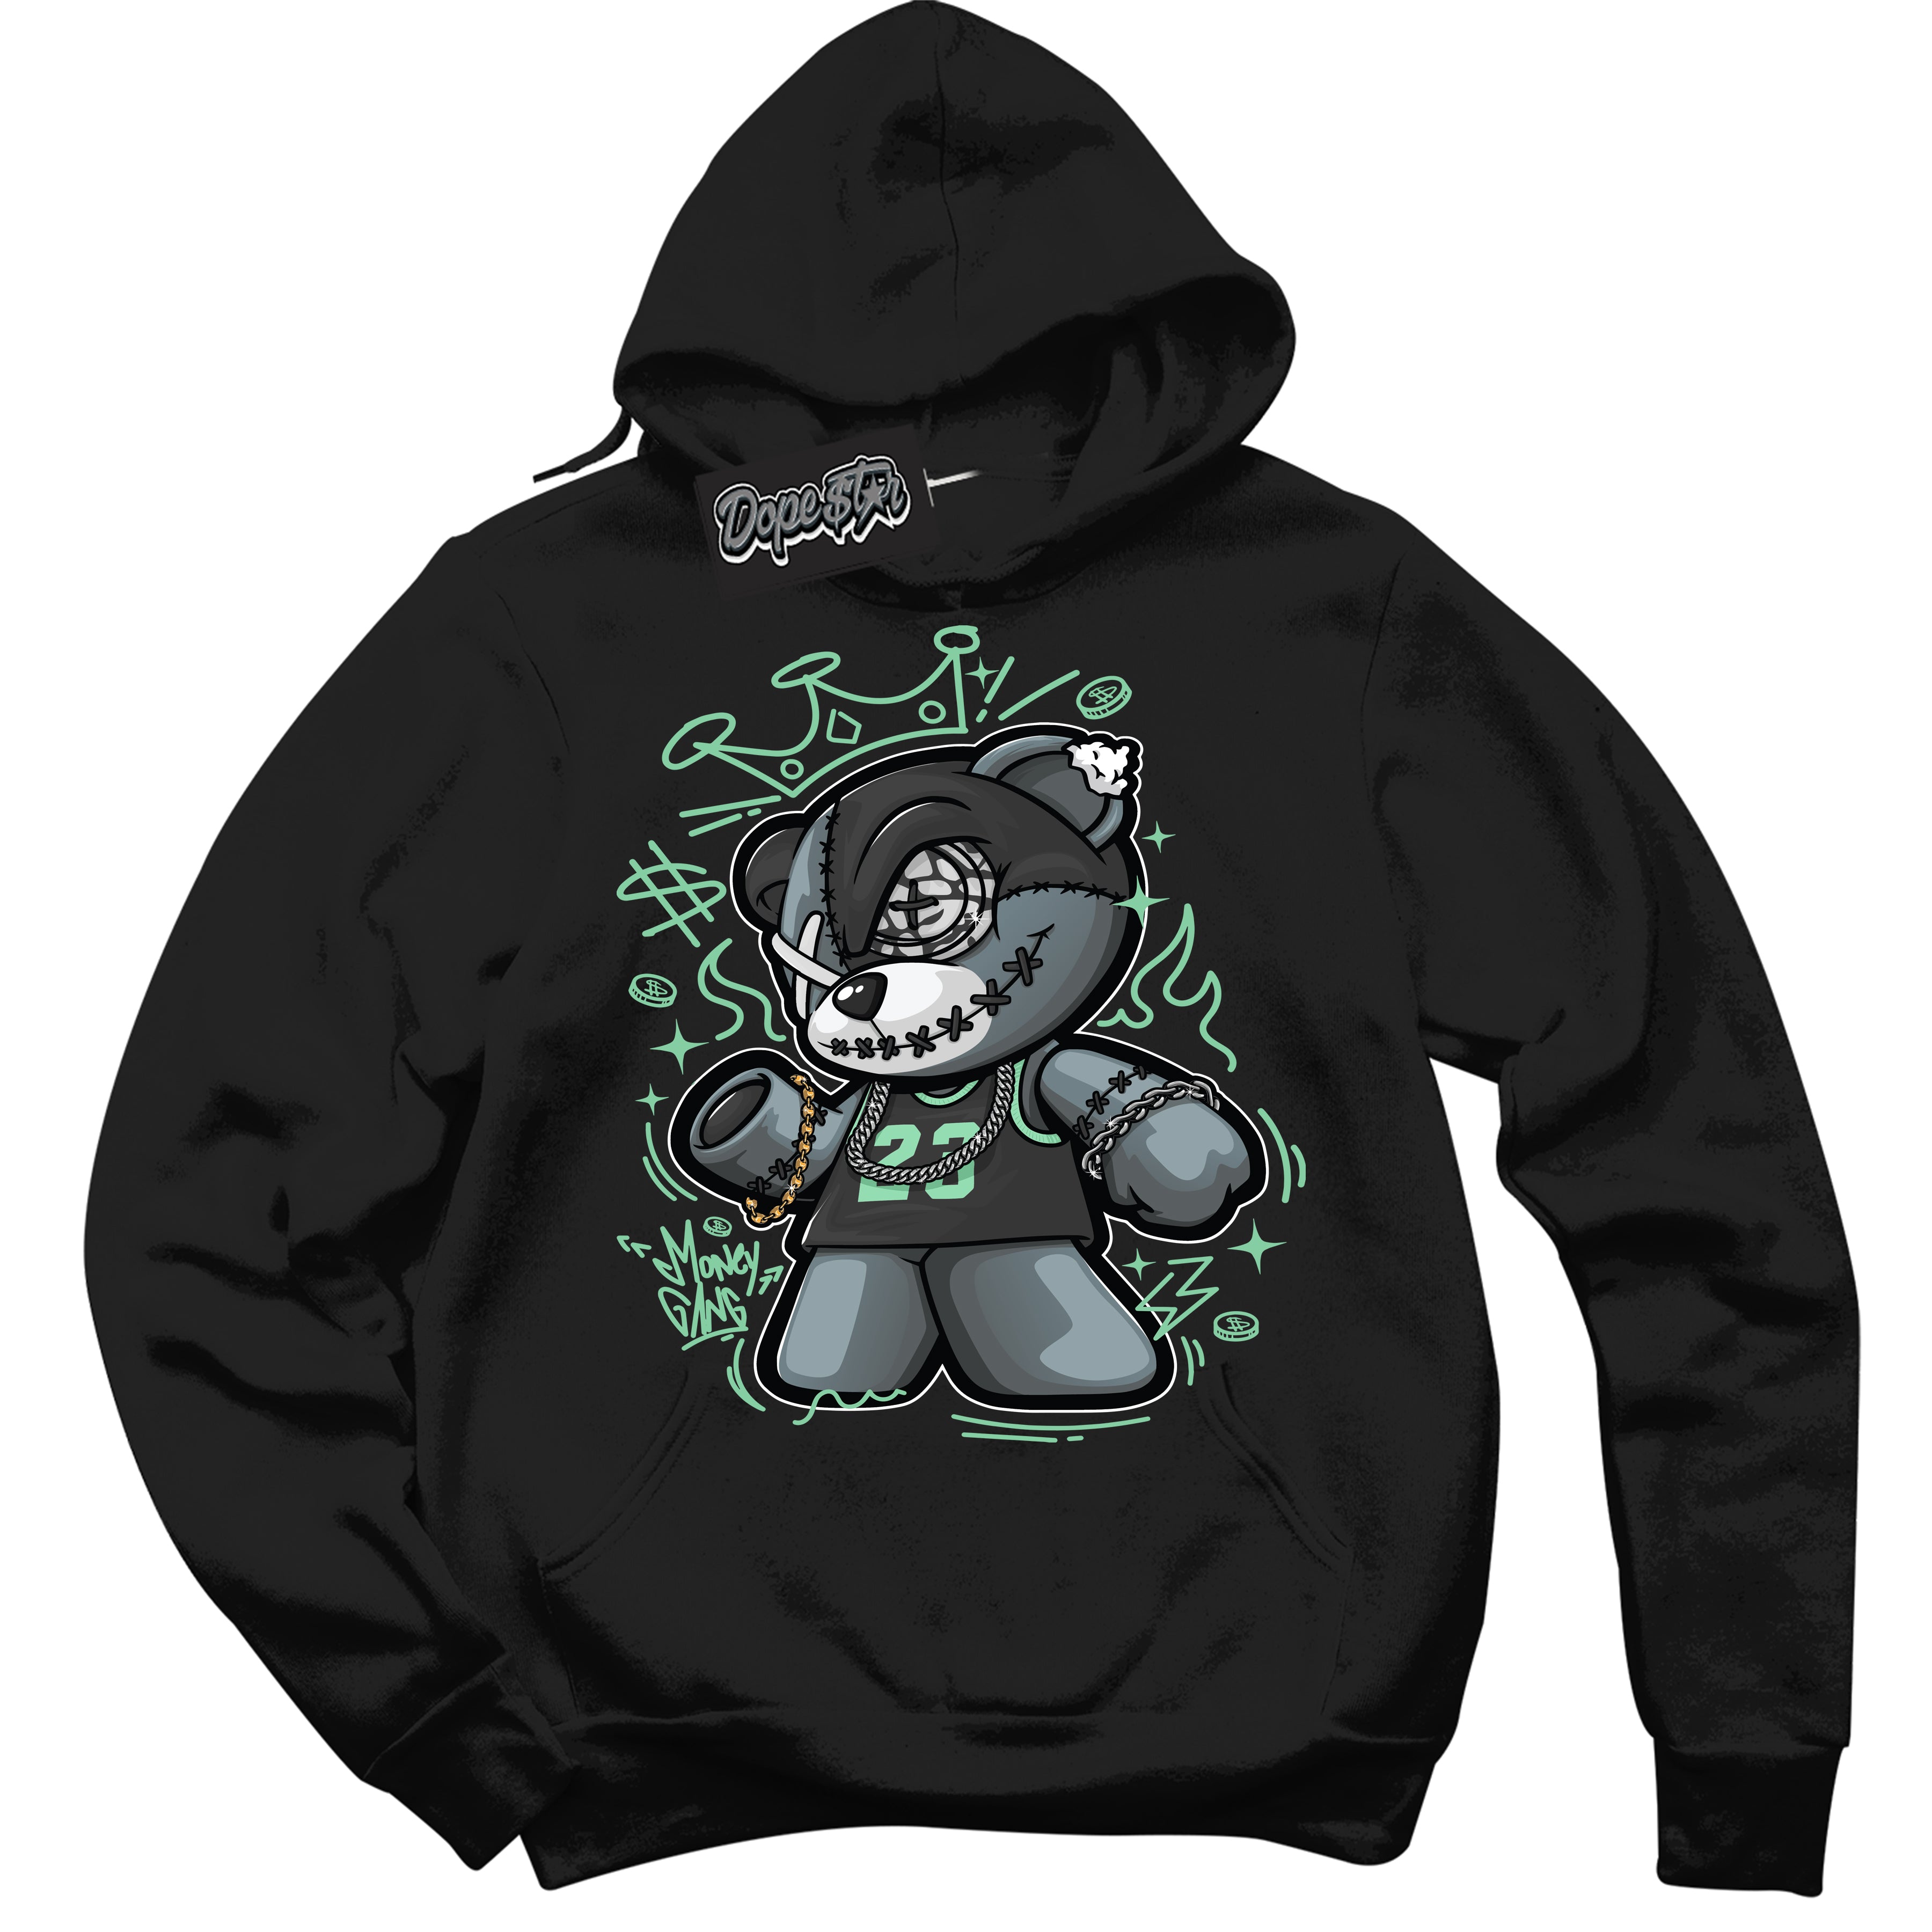 Cool Black Graphic DopeStar Hoodie with “ Money Gang Bear “ print, that perfectly matches Green Glow 3S sneakers